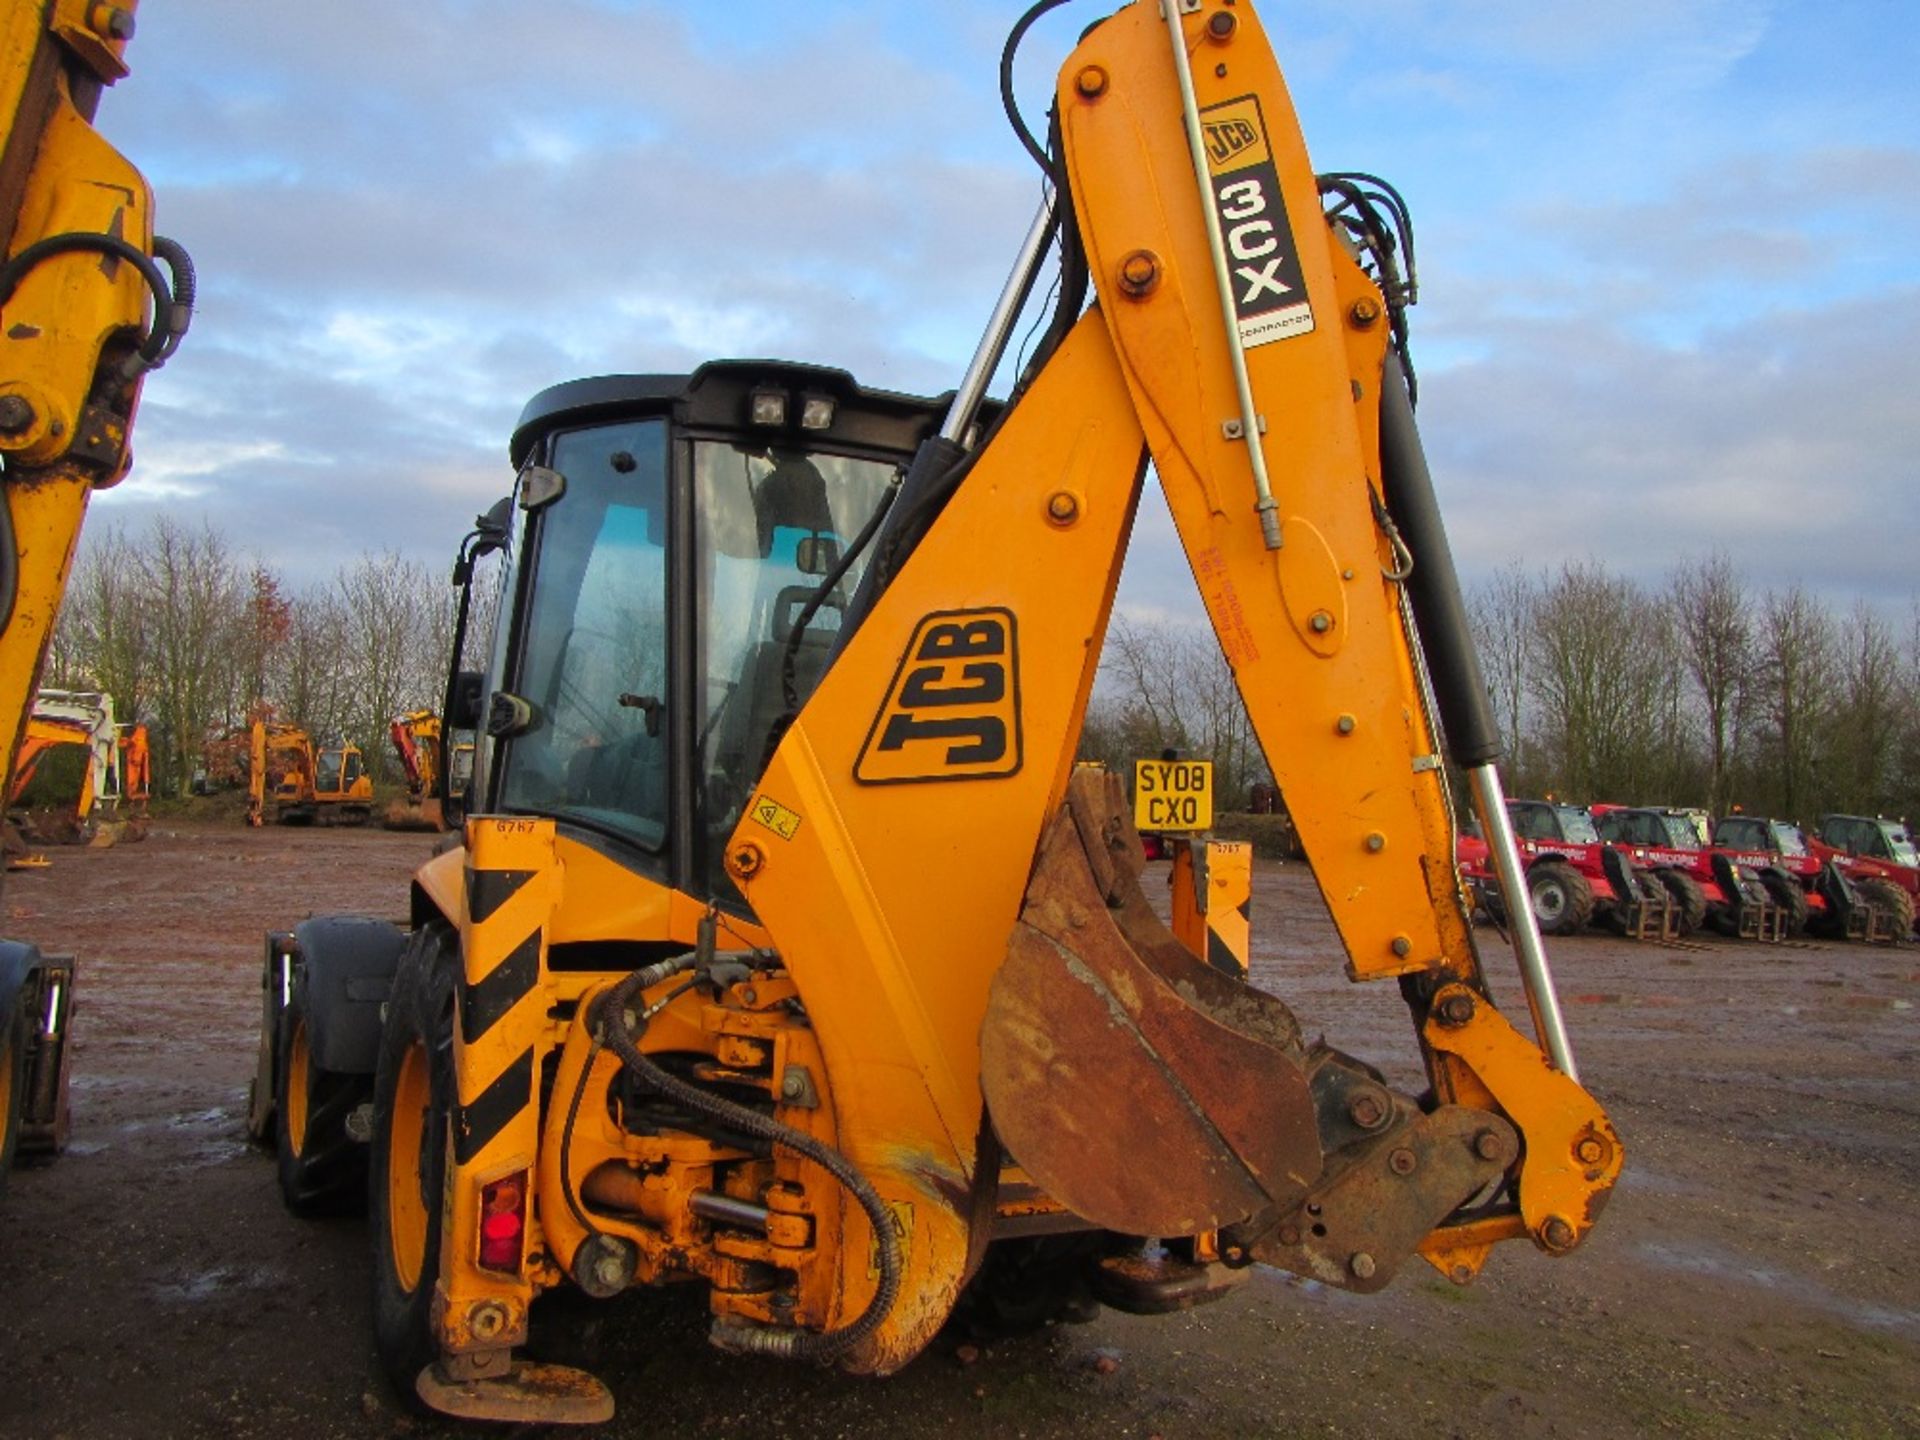 2008 JCB 3CX Contractor c/w Turbo, SRS, Hydraulic Quick Hitch, 4 in 1 Bucket, Forks, Torque Lock - Image 4 of 6